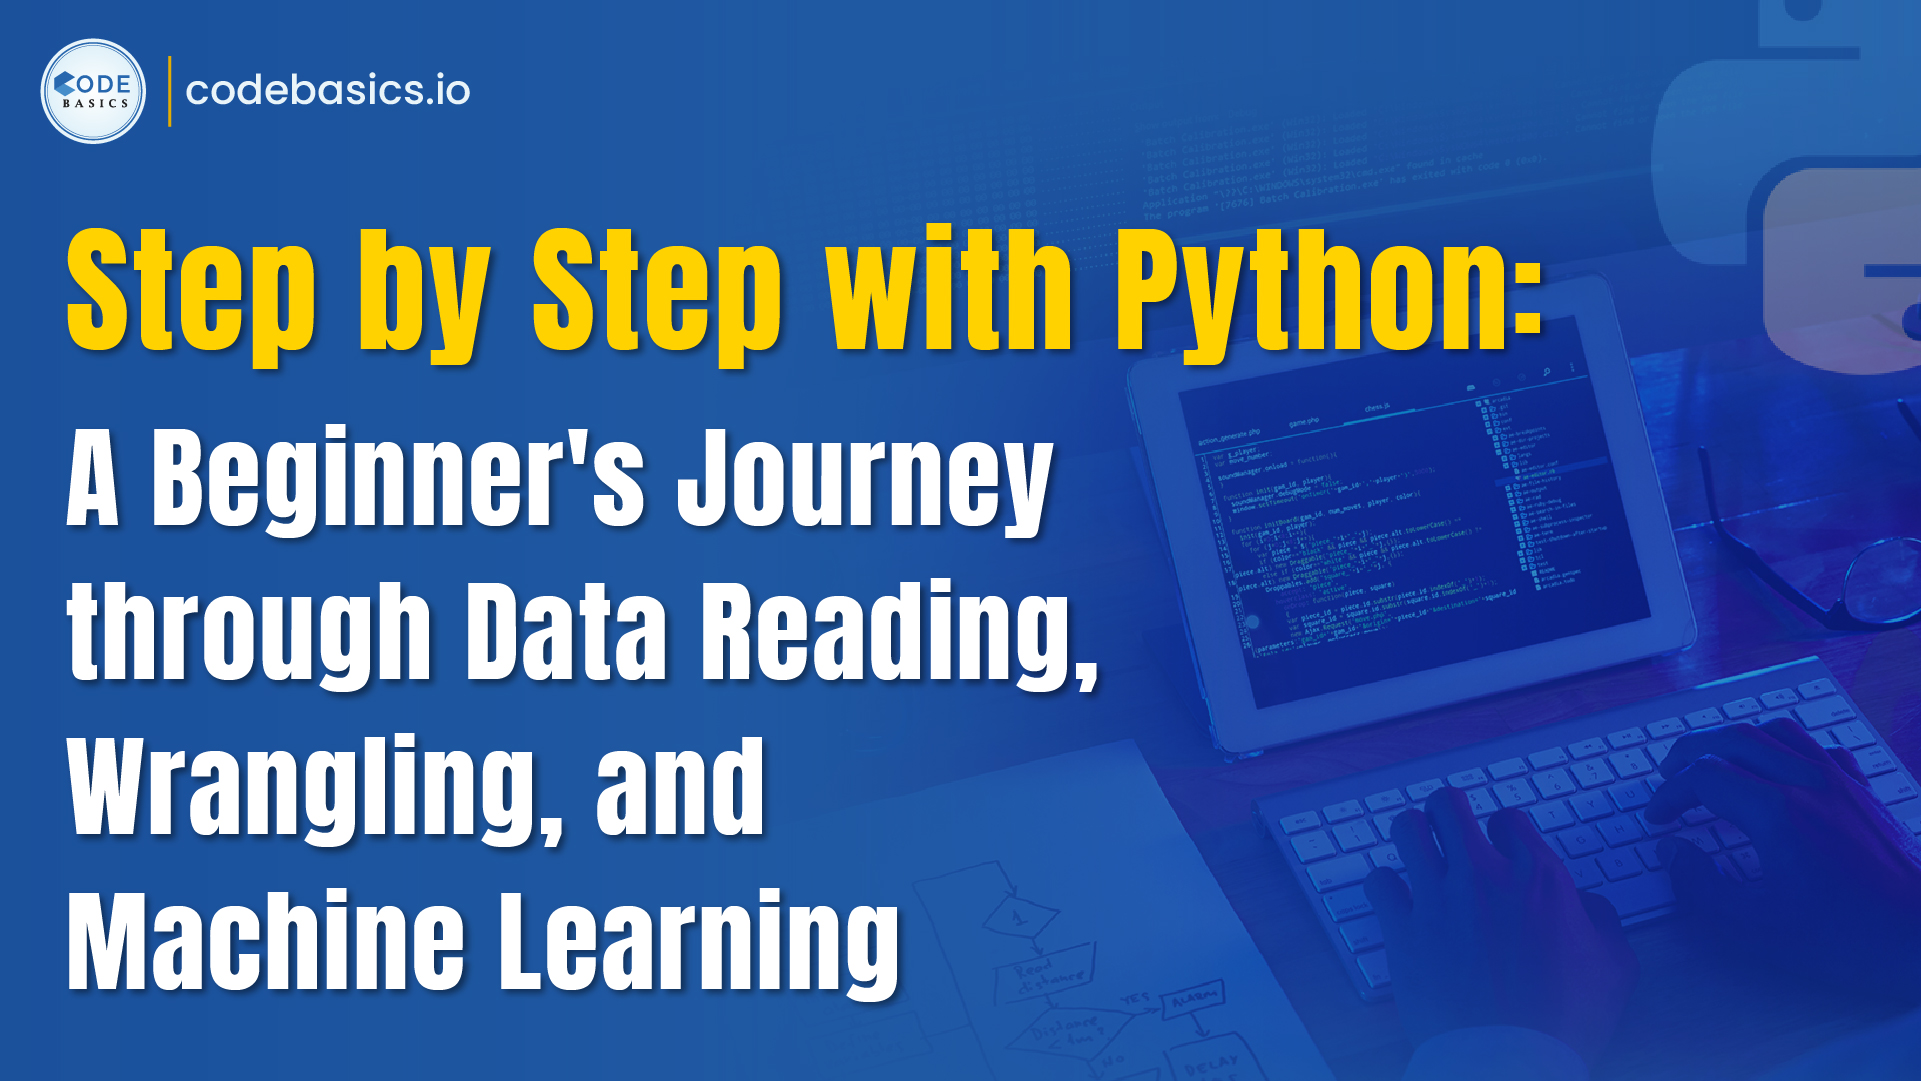 Step by Step with Python: A Beginner's Journey through Data Reading, Wrangling, and Machine Learning